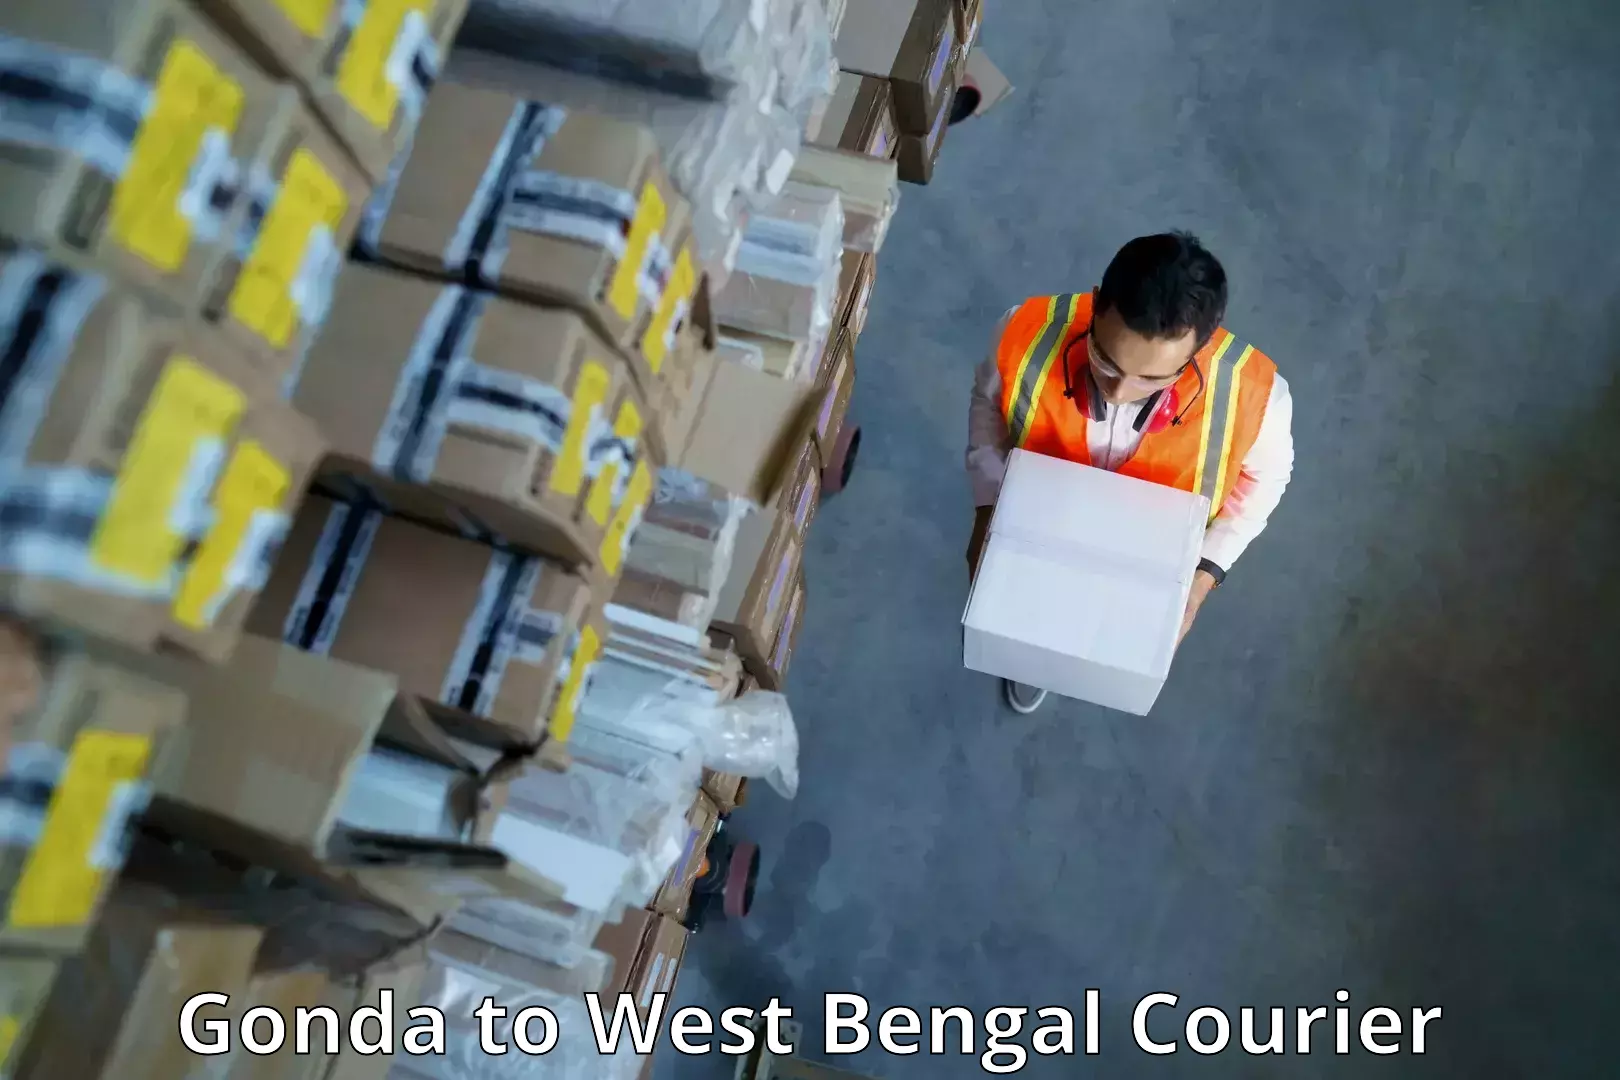 Courier service efficiency in Gonda to Raghunathpur